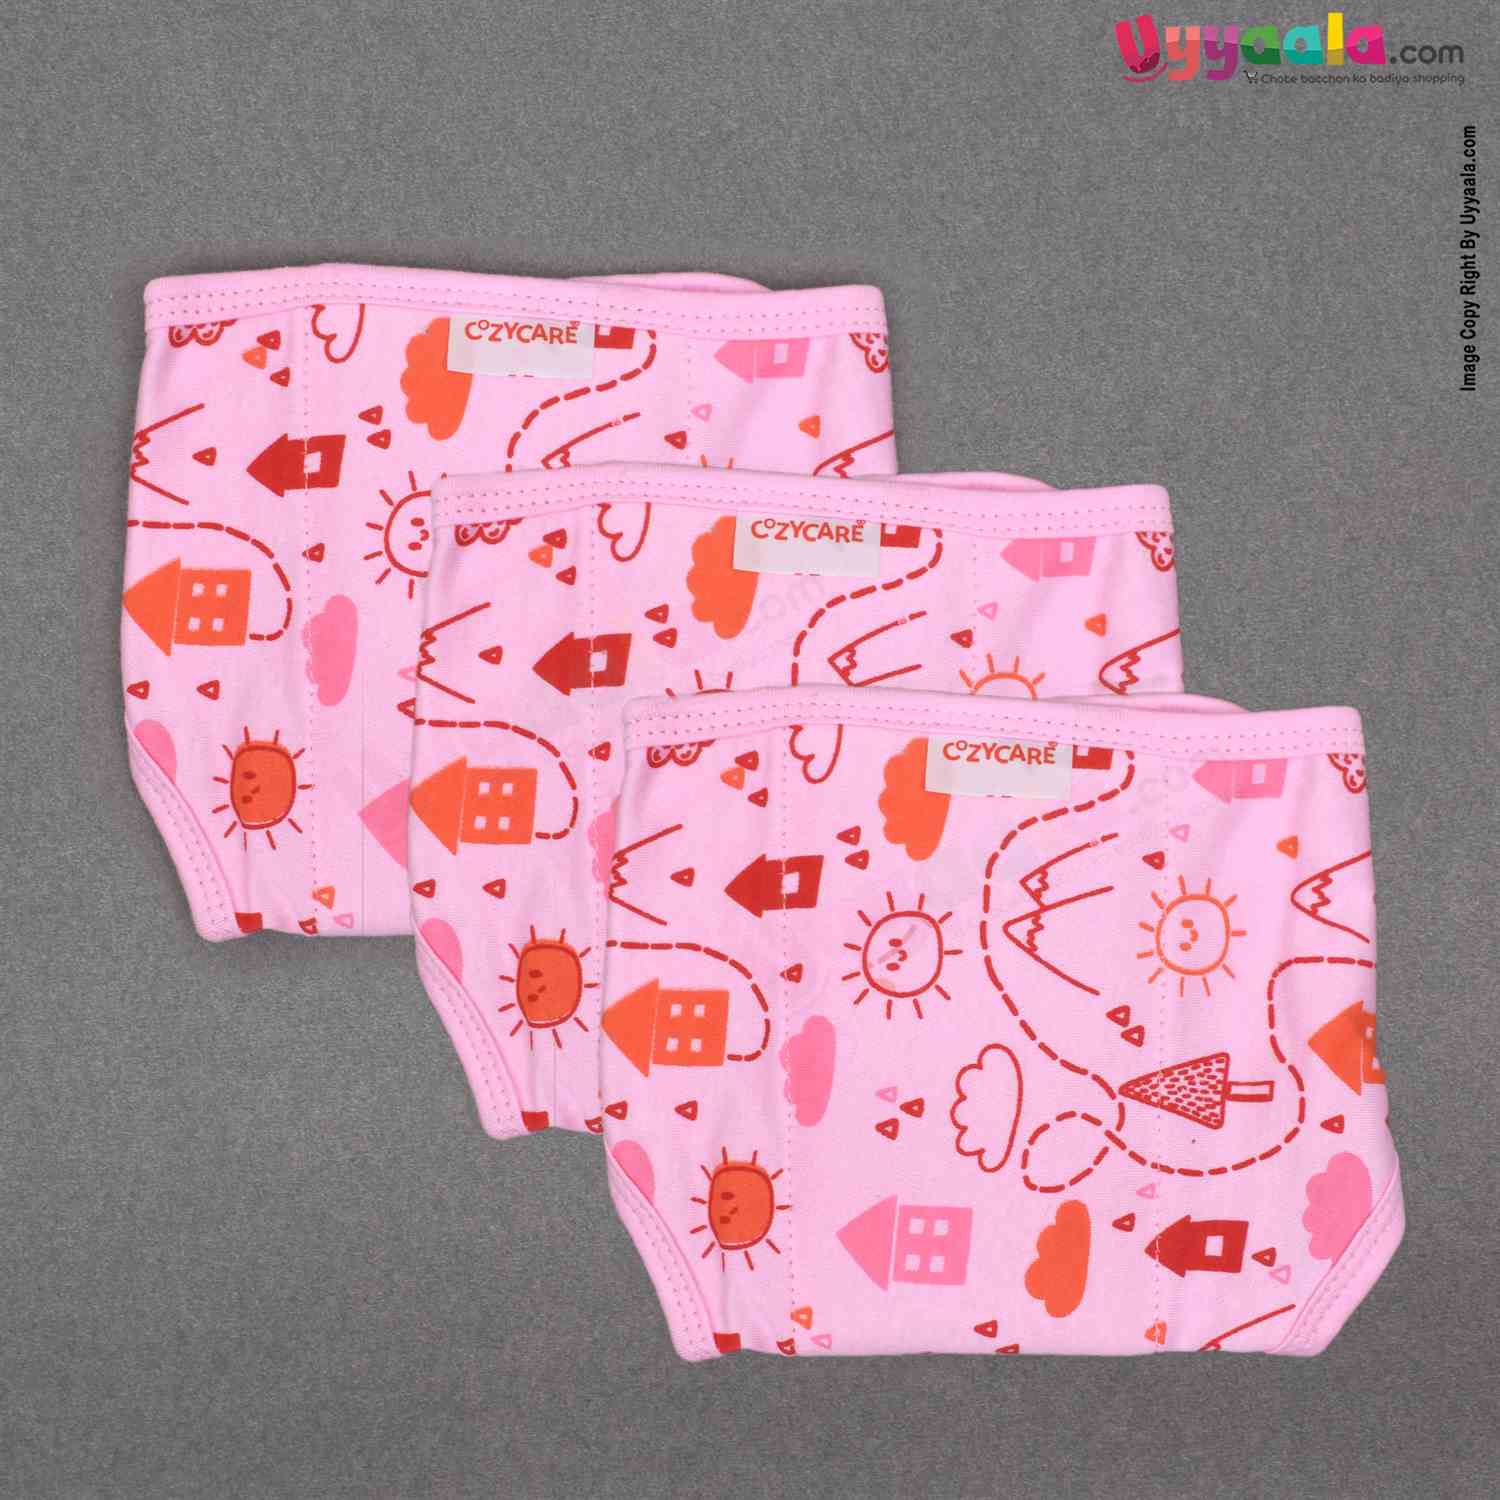 COZYCARE Reusable Diapers With Attached Pad